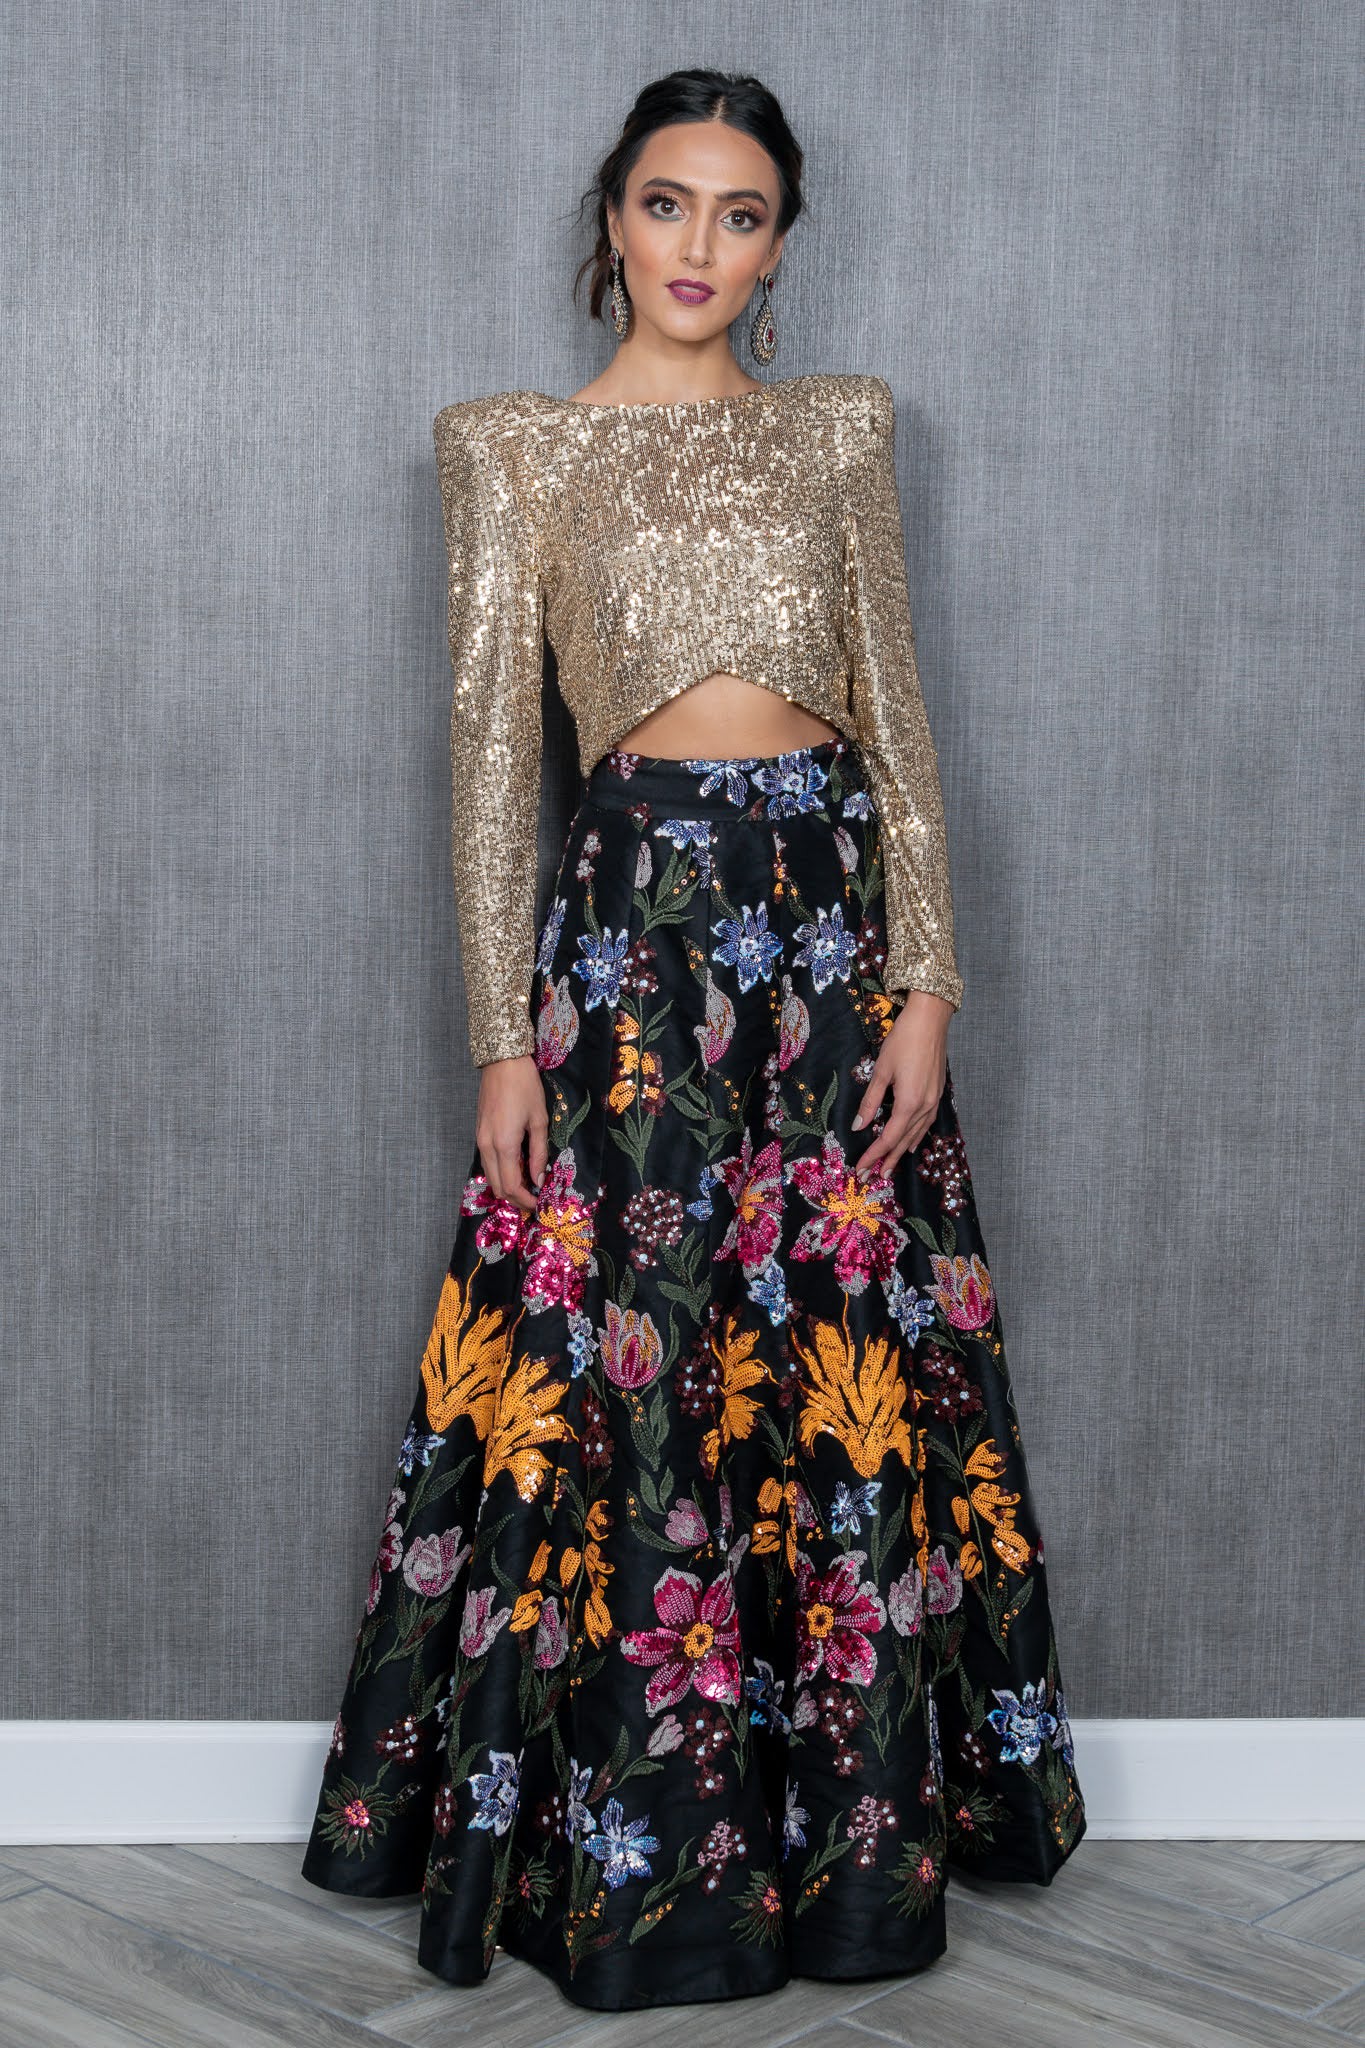 Top 10 Viral Crop Top Lehengas for a Beautiful Engagement Look